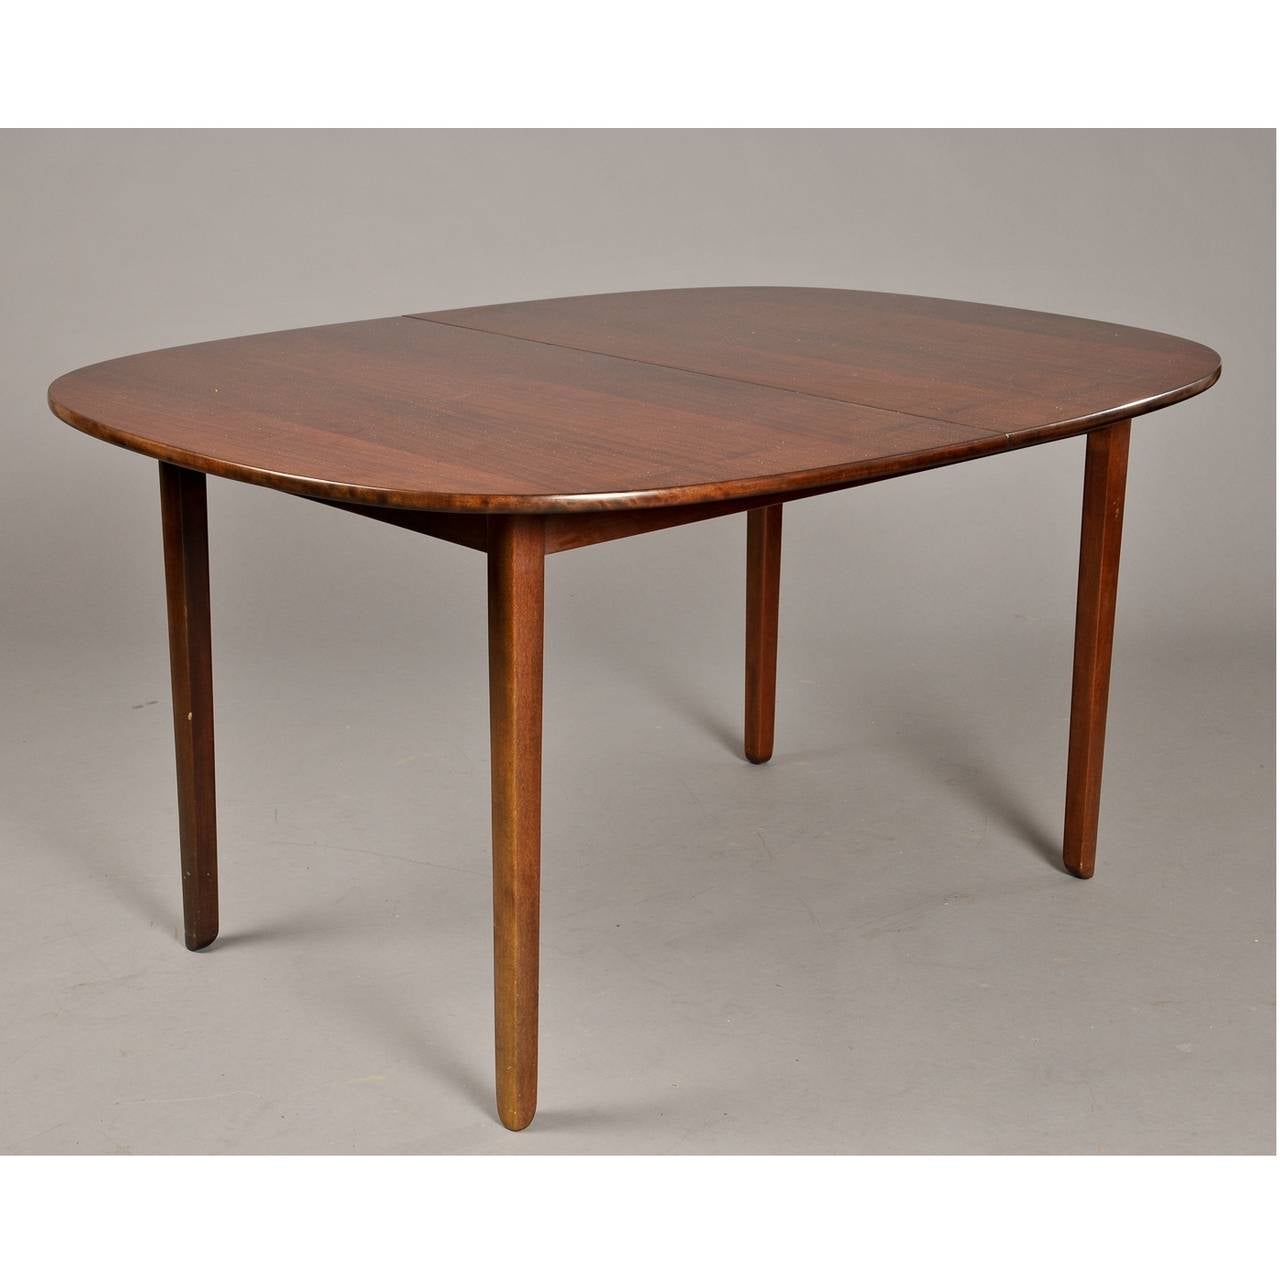 This elegant and functional Ole Wanscher dining table is from the well-known “Rungstedlund” collection. The table includes two extension plates and can seat up to ten people comfortably.

Length without extension plates - 57 inches.
Length with